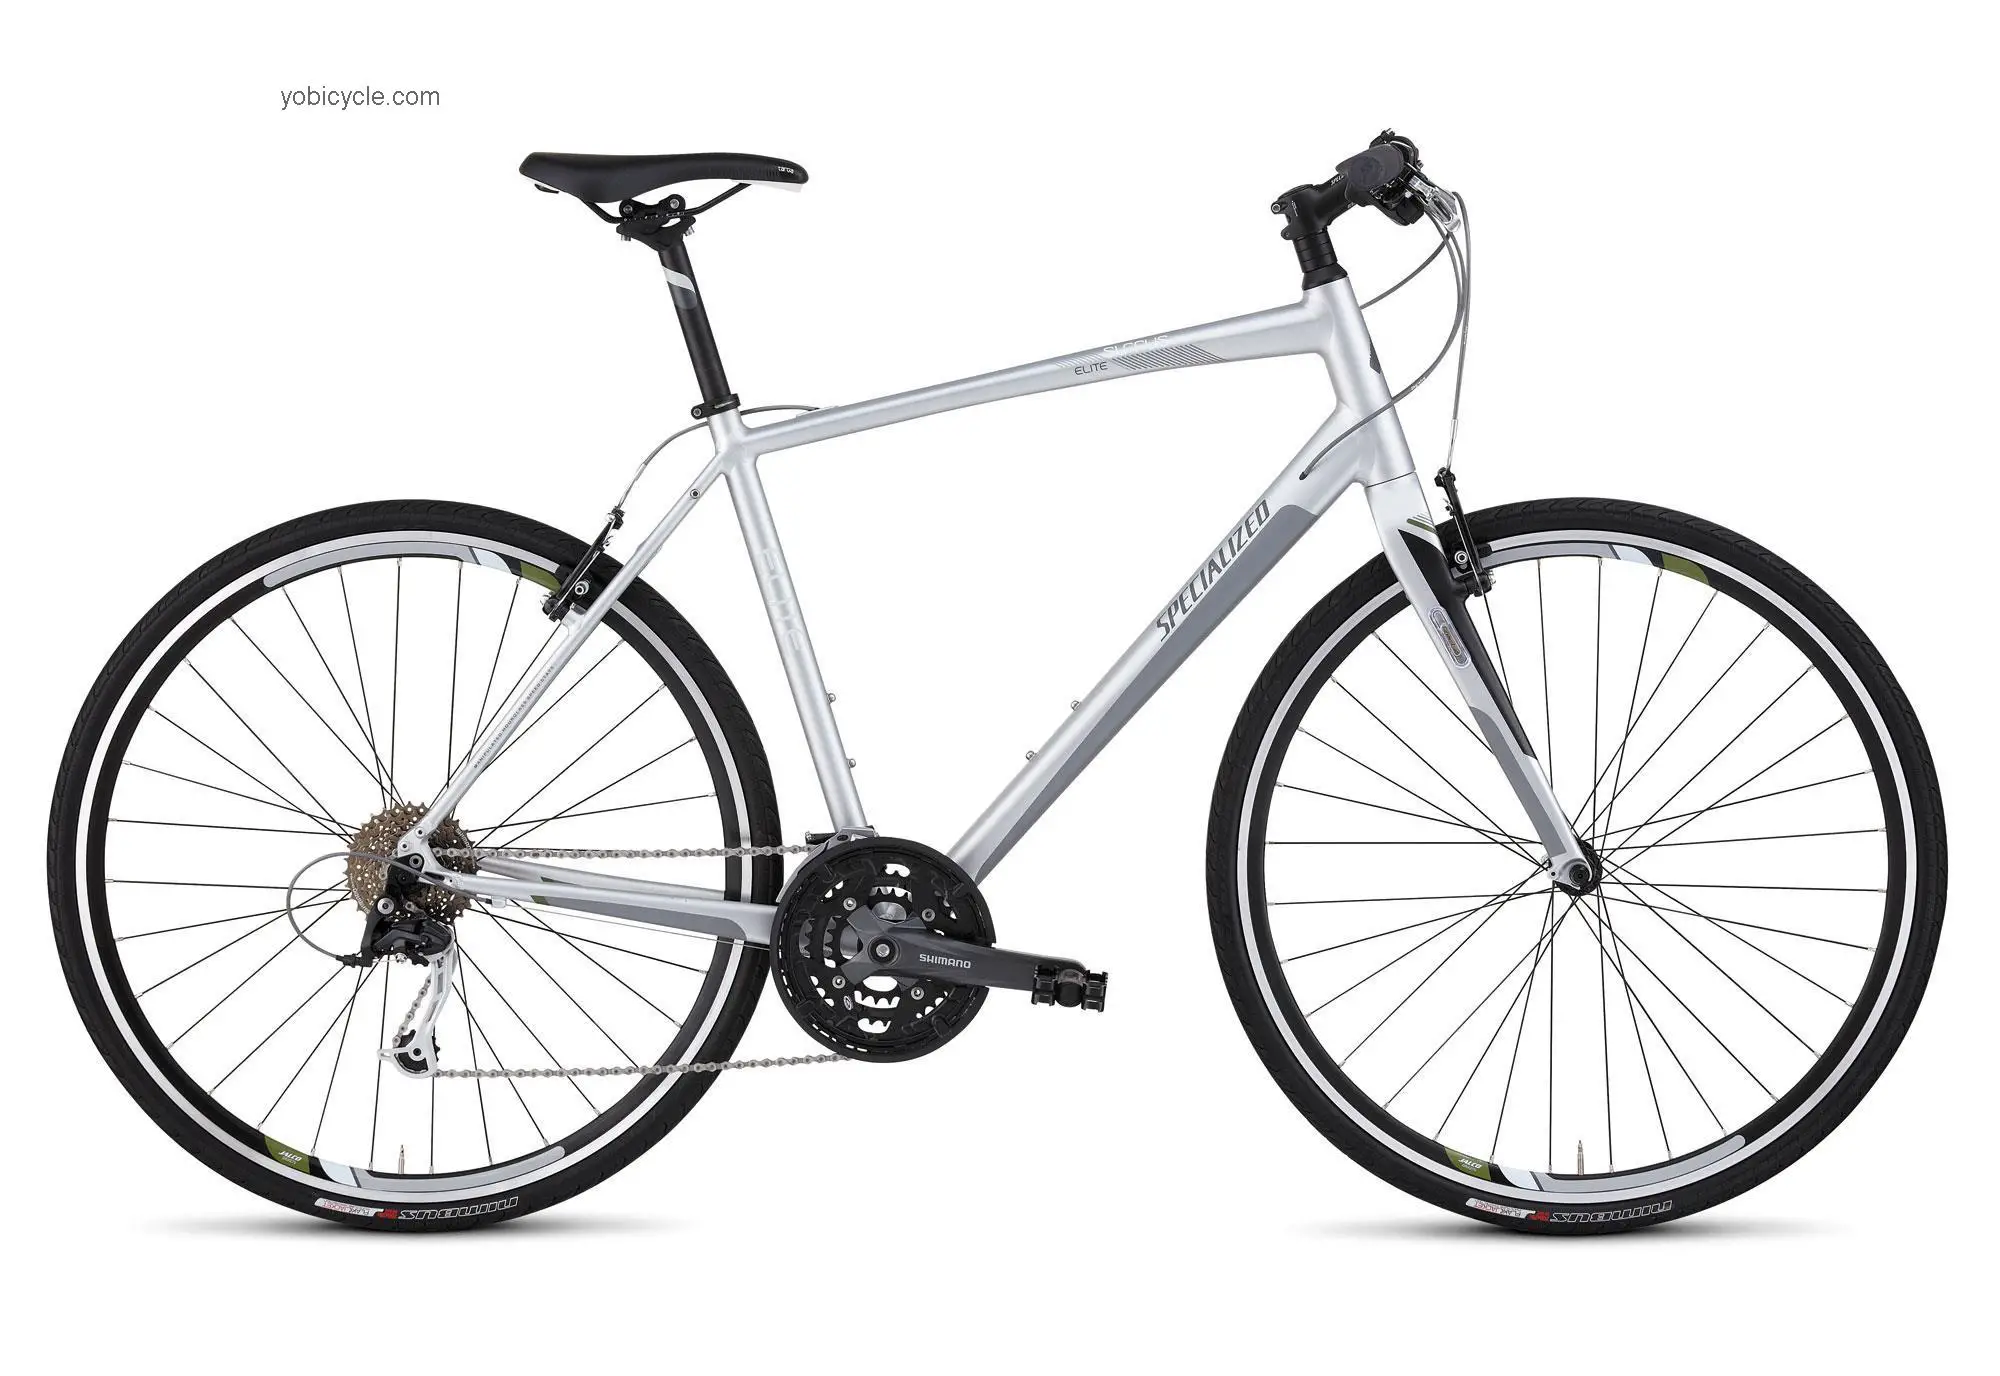 Specialized Sirrus Elite 2012 comparison online with competitors